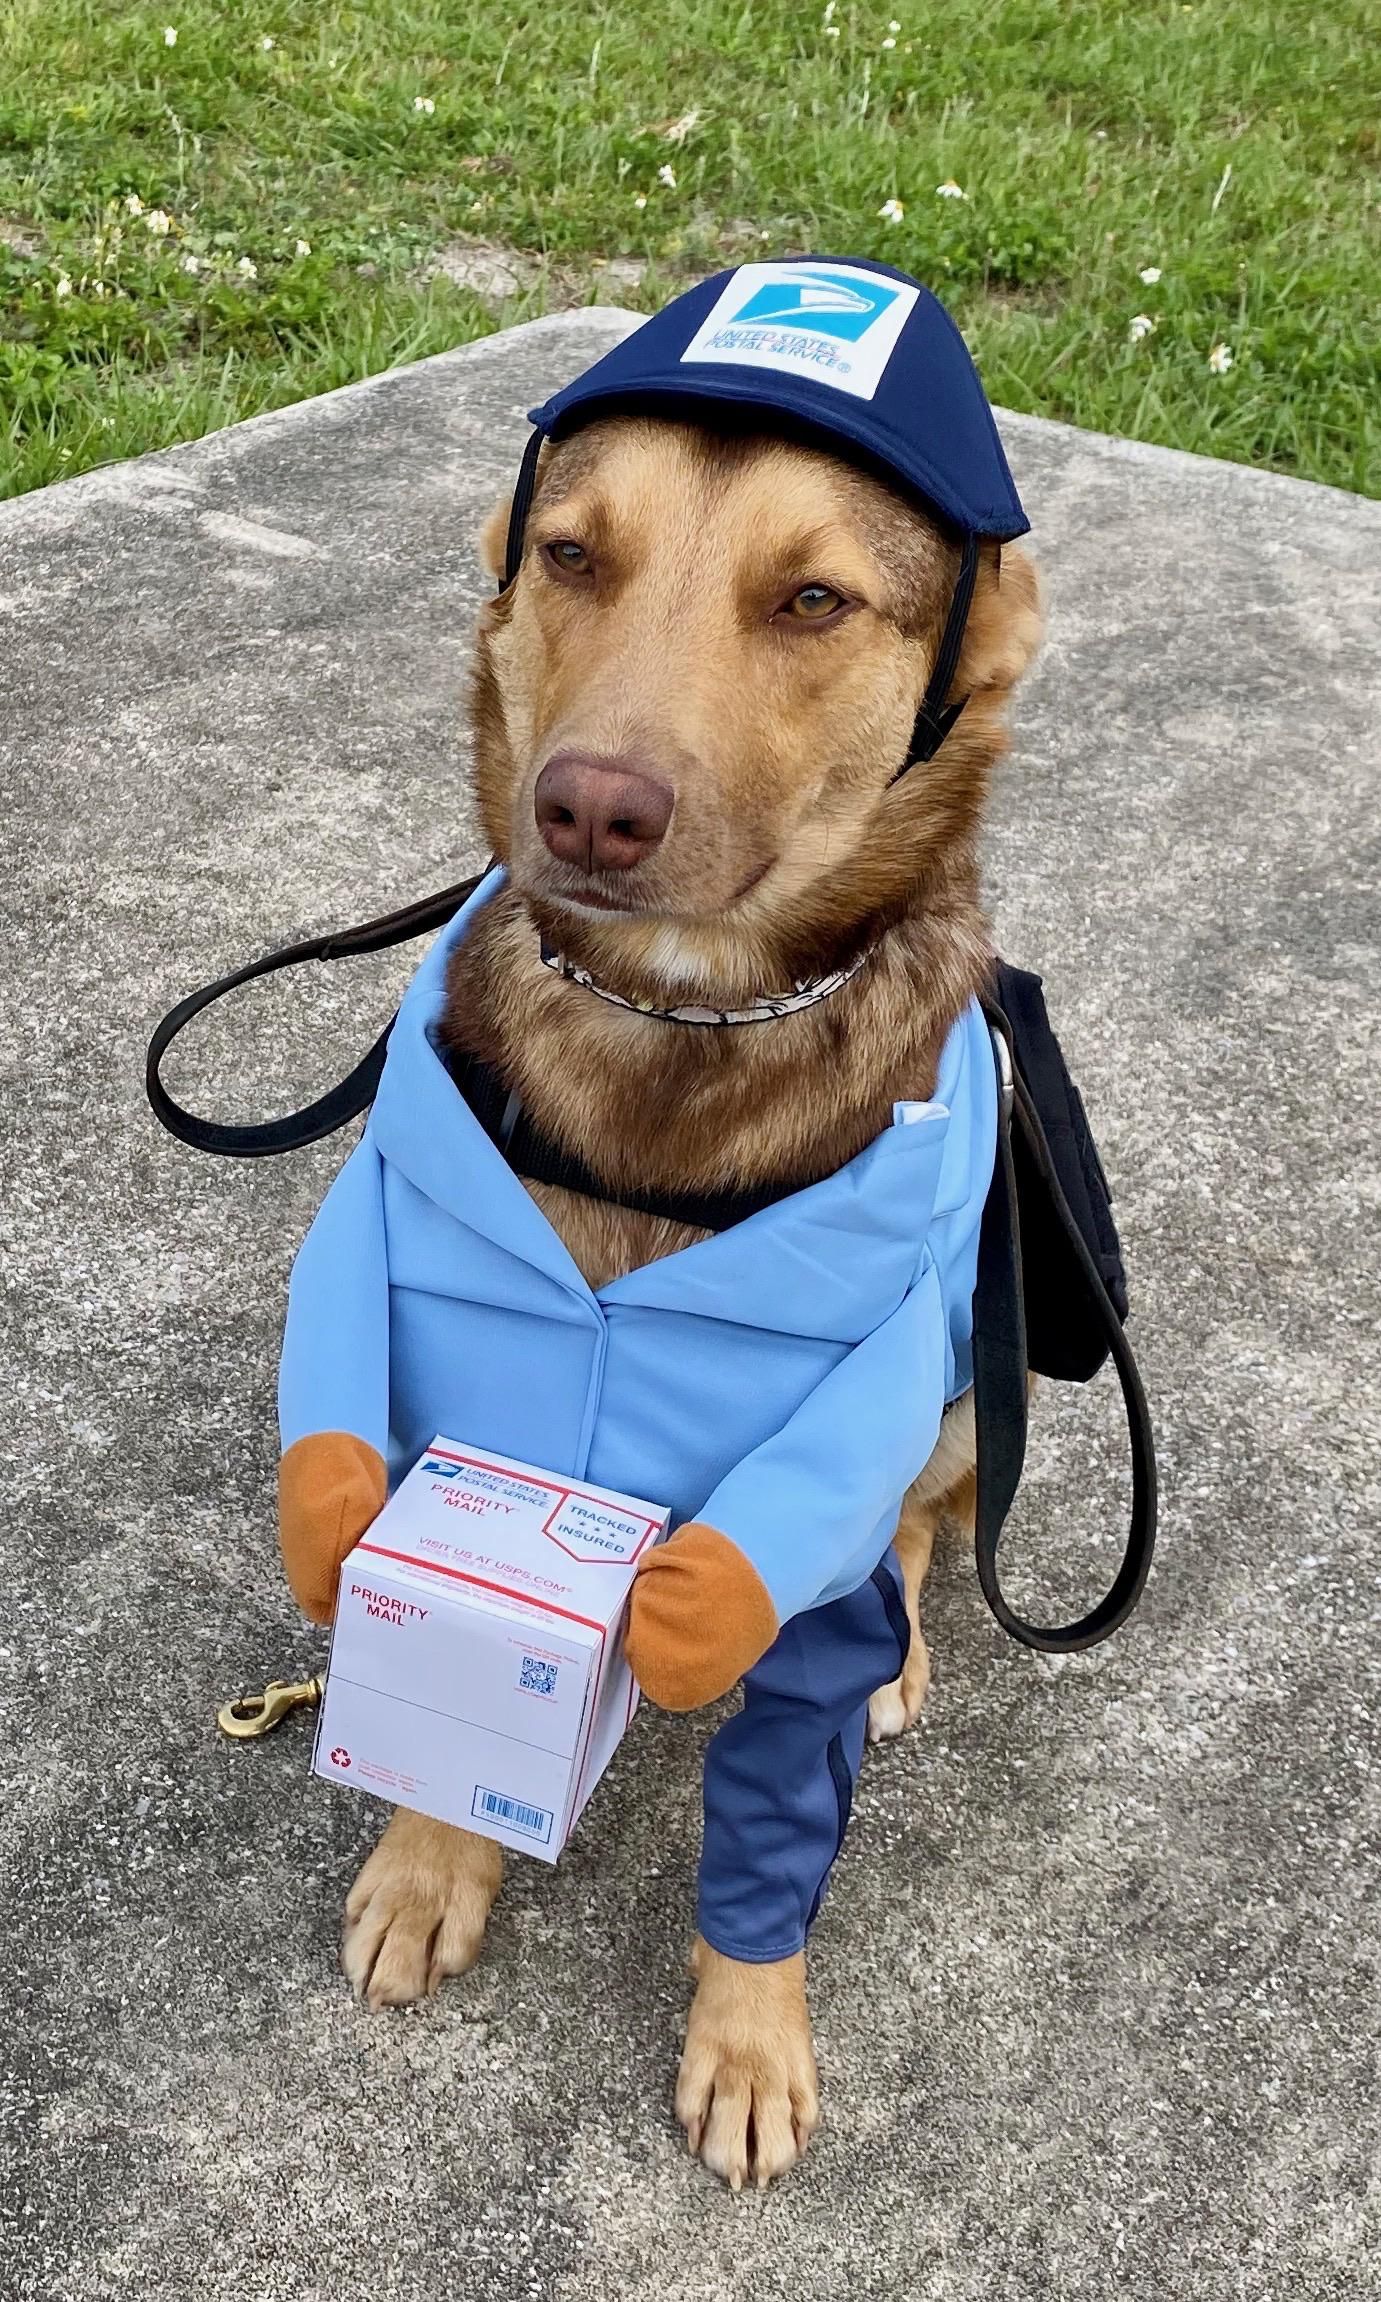 My friend works for the USPS. This is her service dog and best friend, Herschel the Postal Pup. He takes his job very seriously!